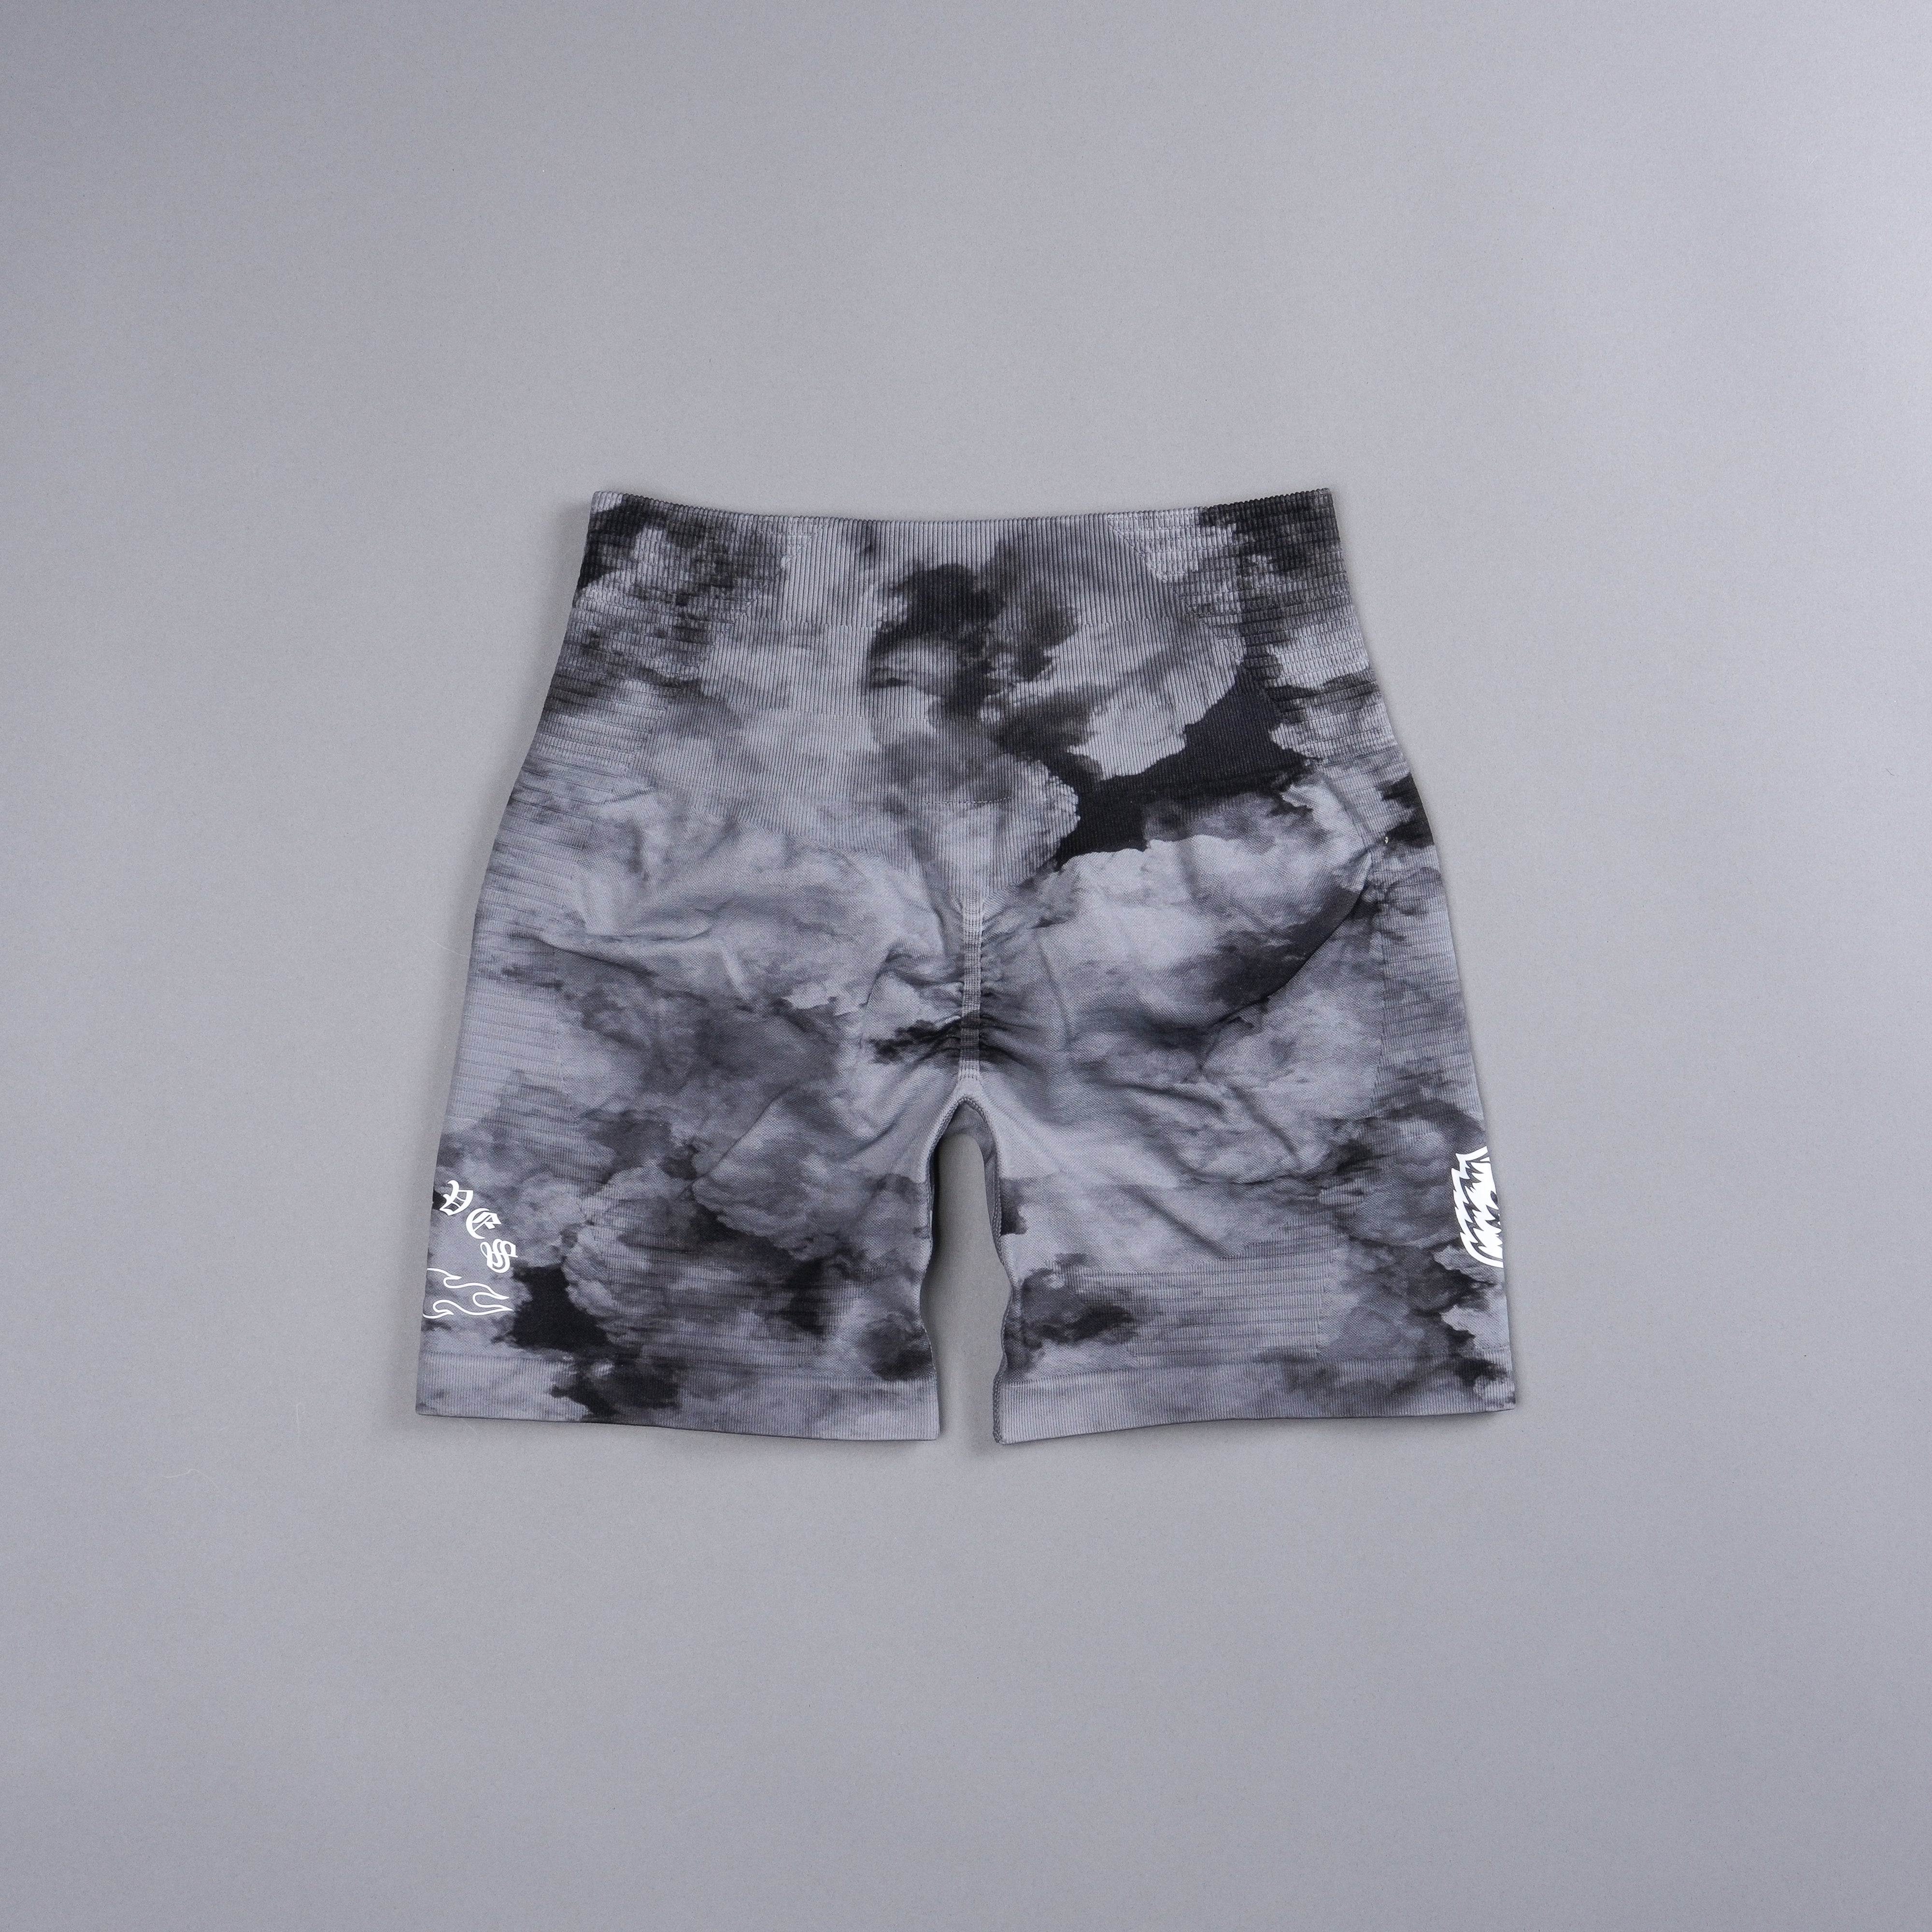 Riders Everson Seamless "Valencourt" Shorts in Black Ghost Clouds